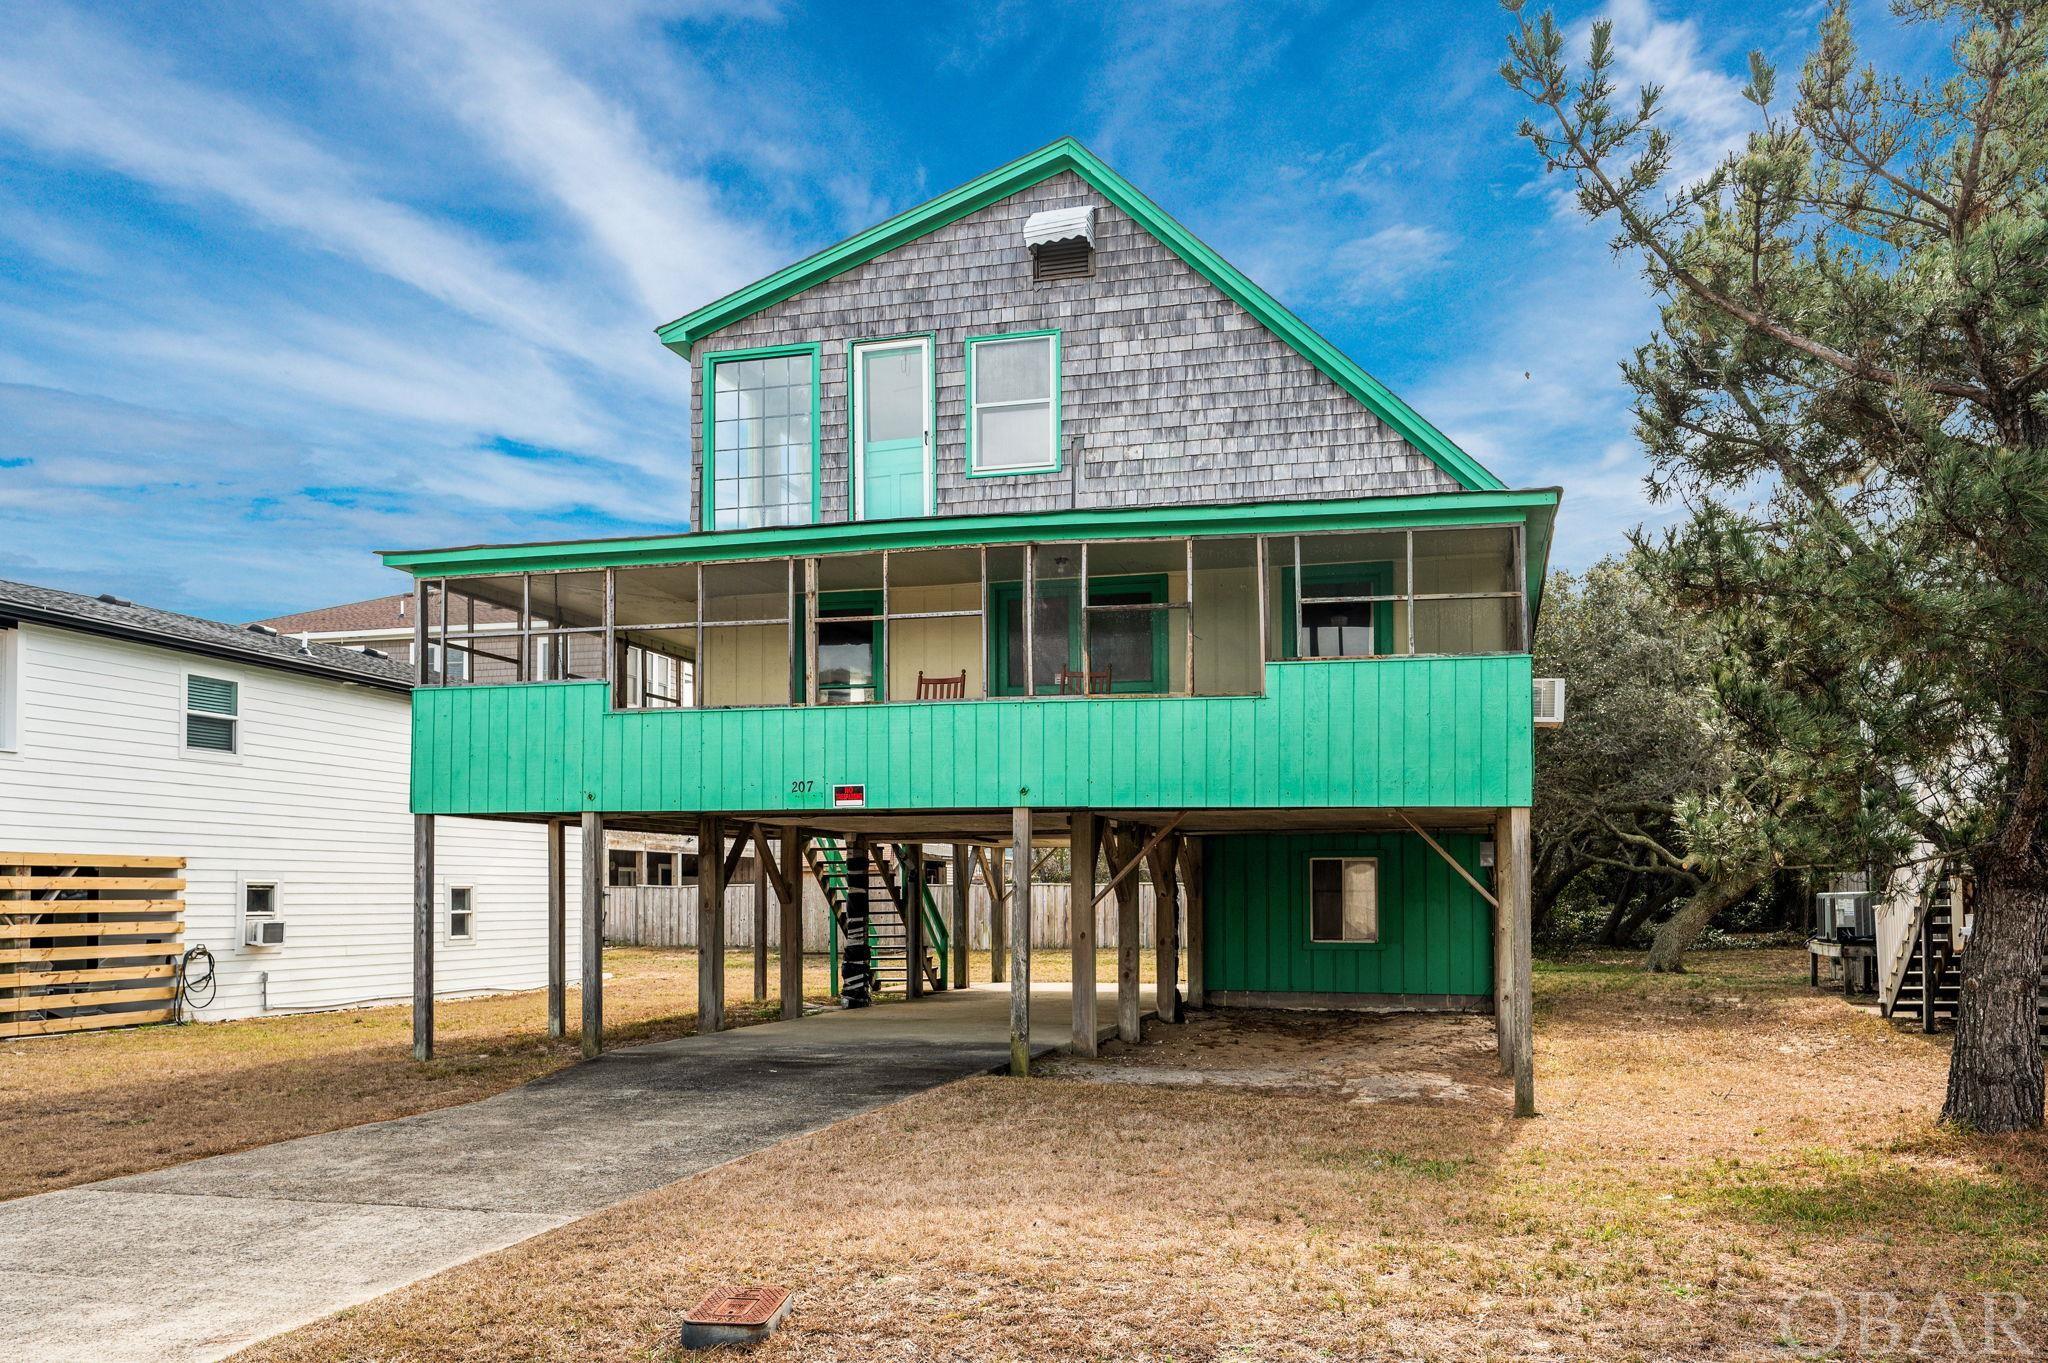 Classic cottage, in a Spectacular location between Bonnett St. beach access and Dowdy Park in Nags Head! Home has so much potential, remodel and make it your own Nags Head beach getaway!!  Easy walk to the beach, to Dowdy Park, YMCA, shopping and more!